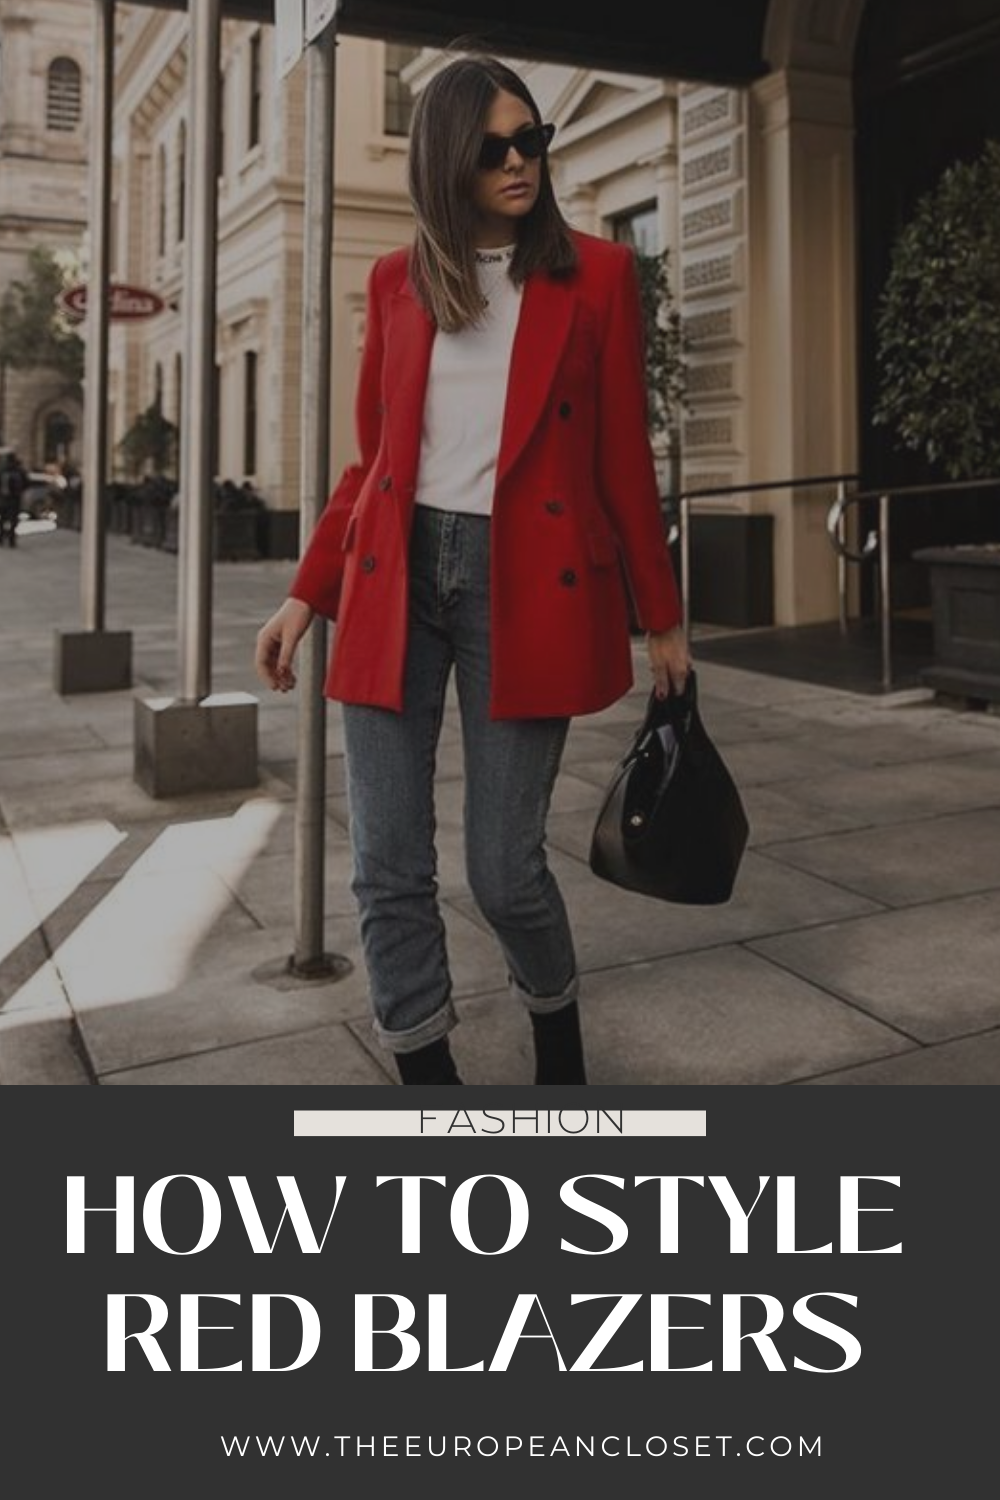 e you wondering how to wear a red blazer to get a chic, sophisticated look without making it look too formal? If so, check out these stylish red blazer outfits!